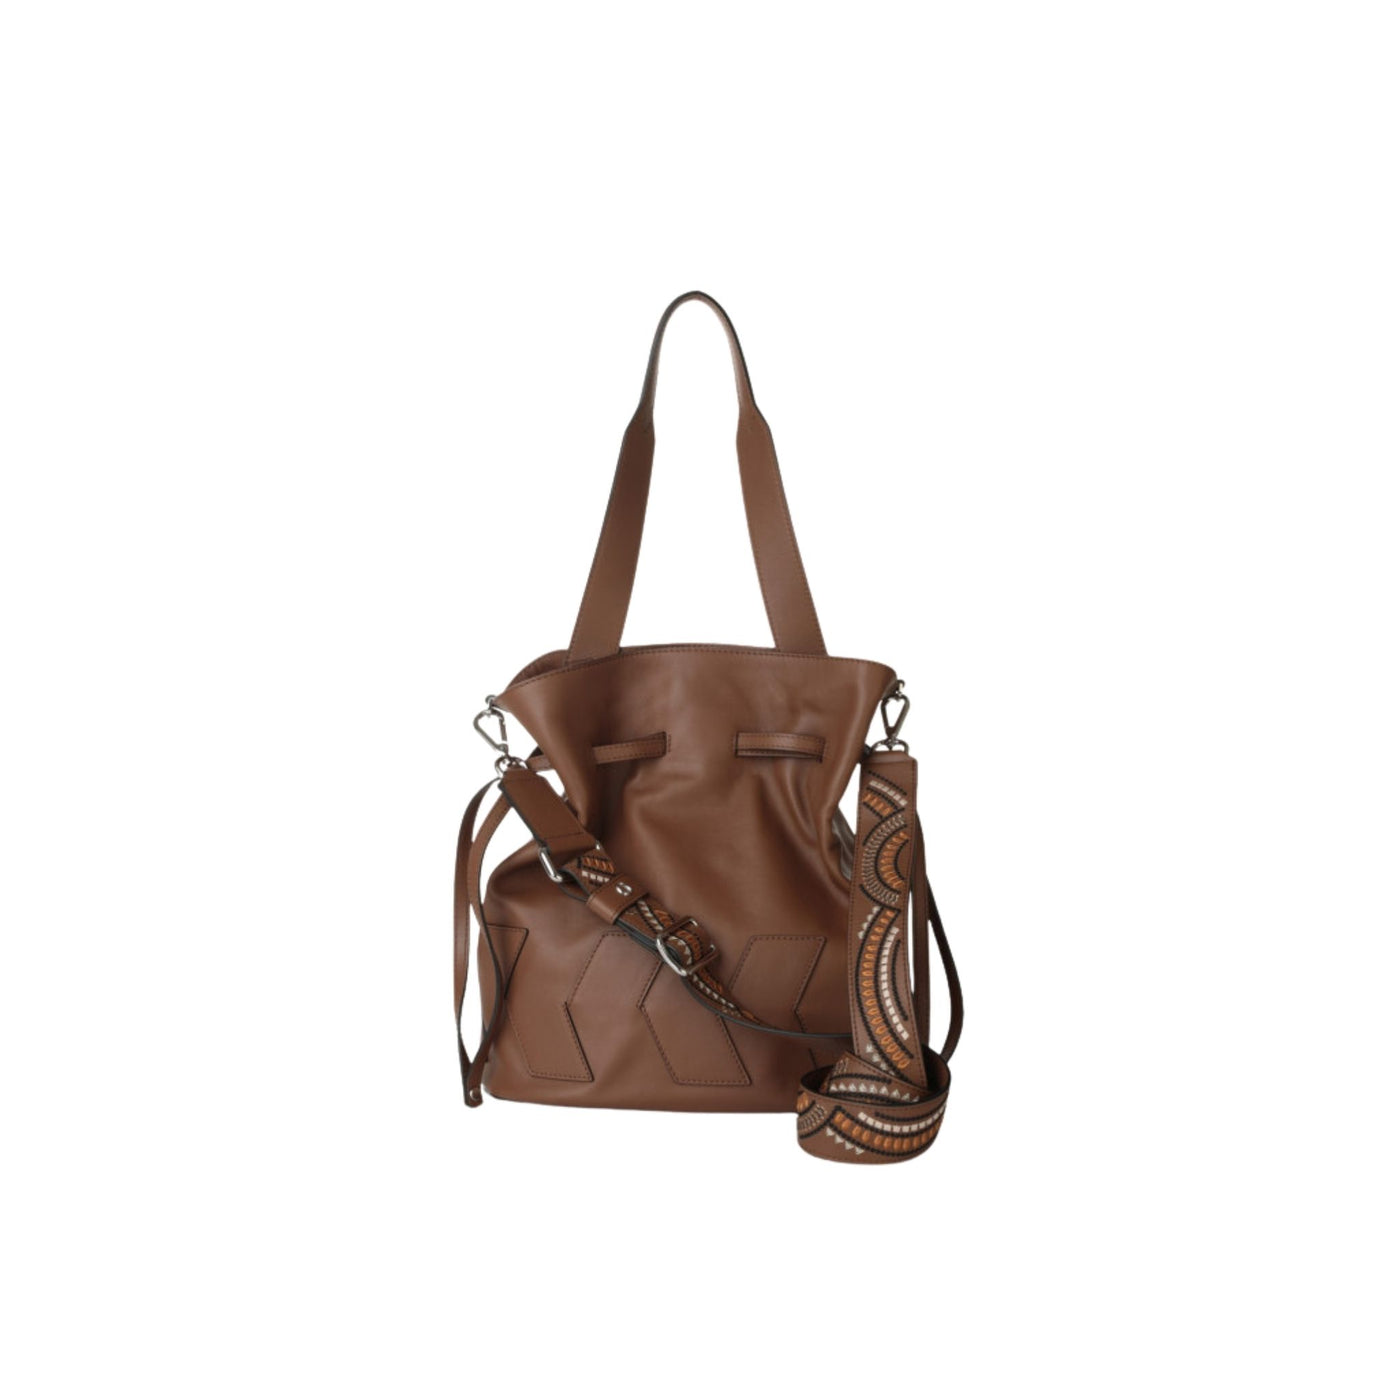 Women's bag in textured leather with shoulder strap